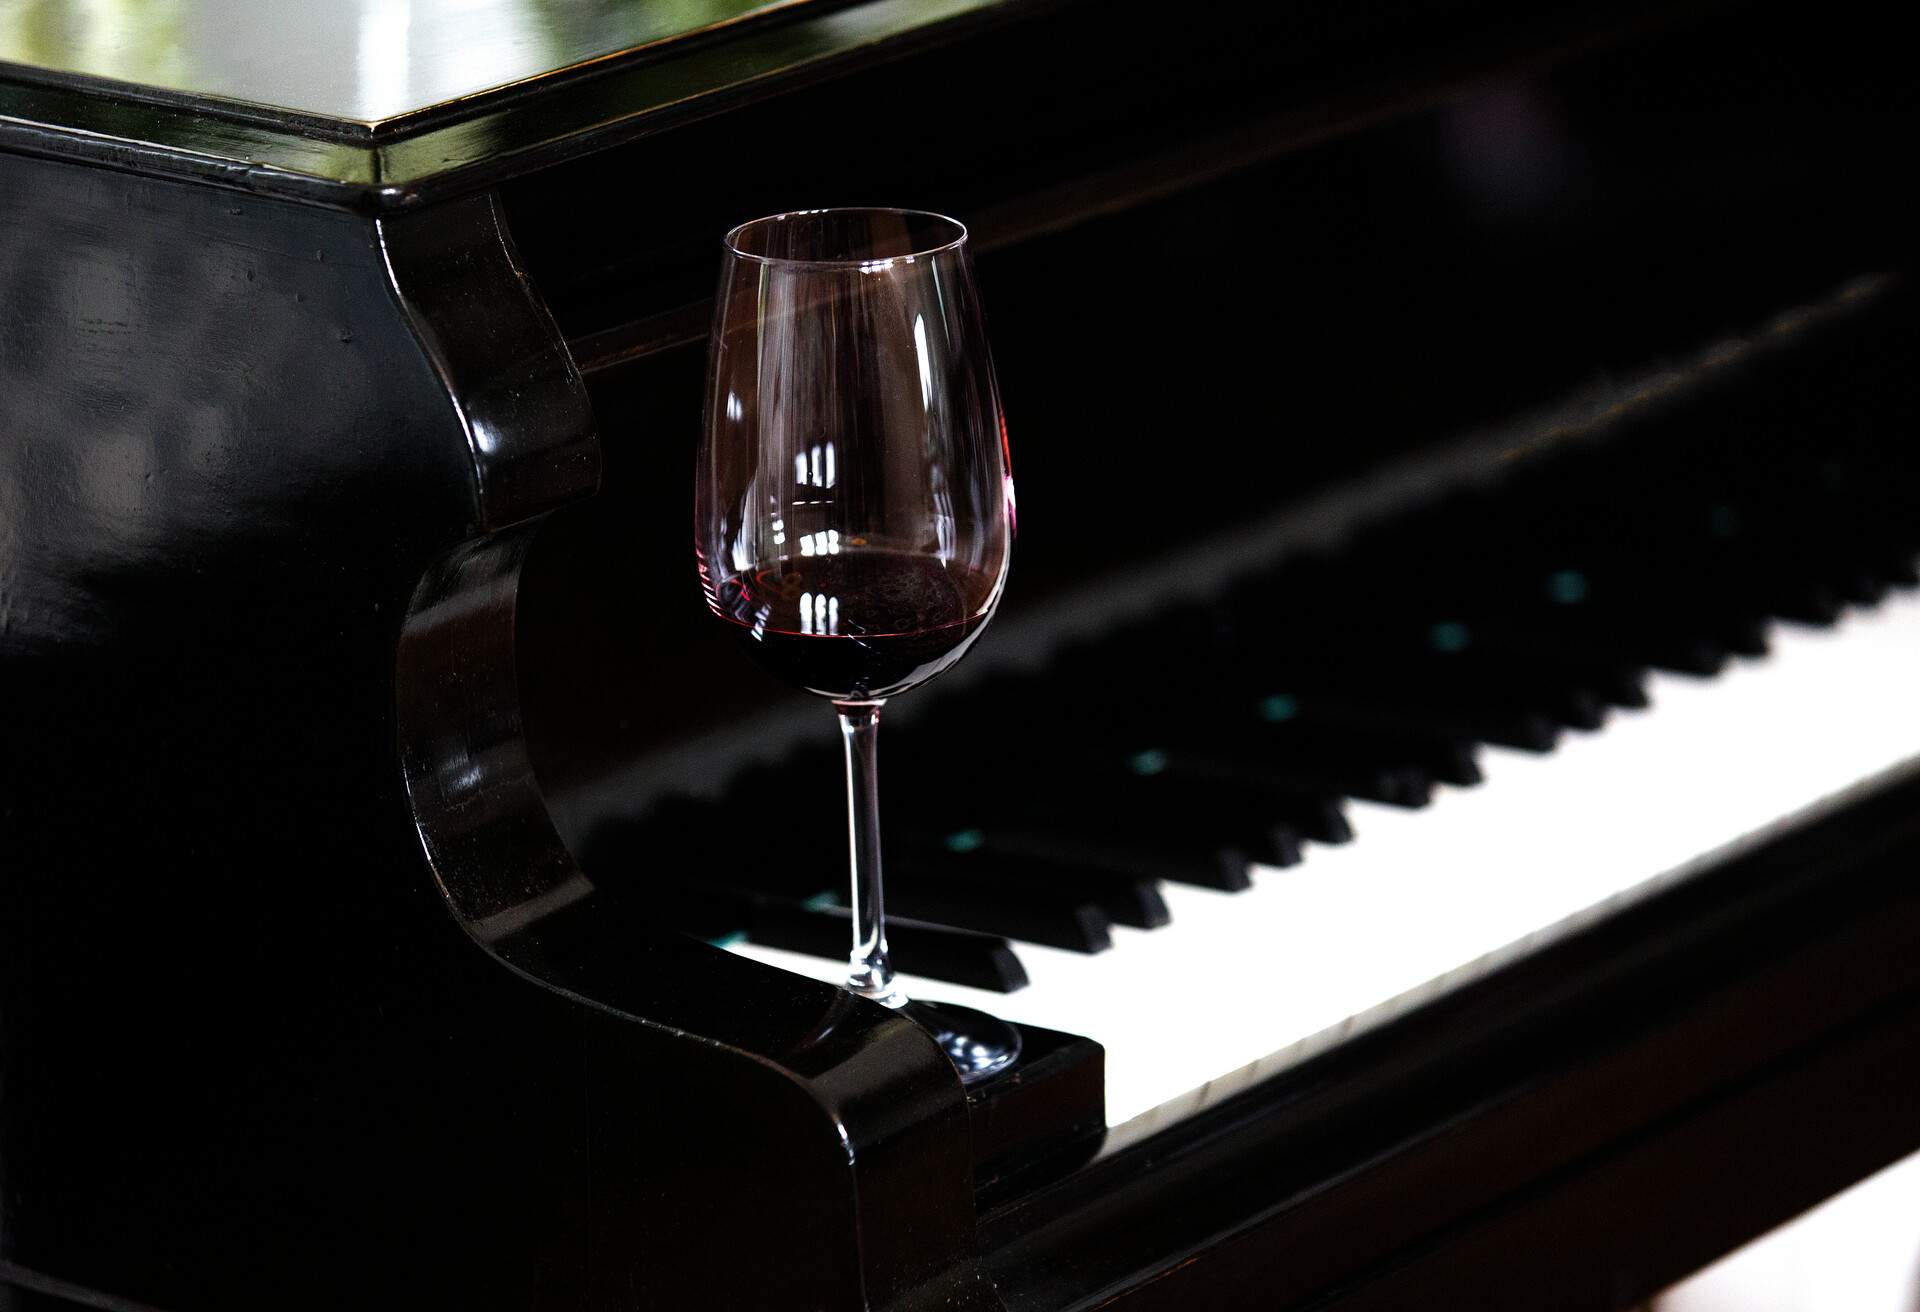 A glass of wine delicately placed at the edge of a piano.